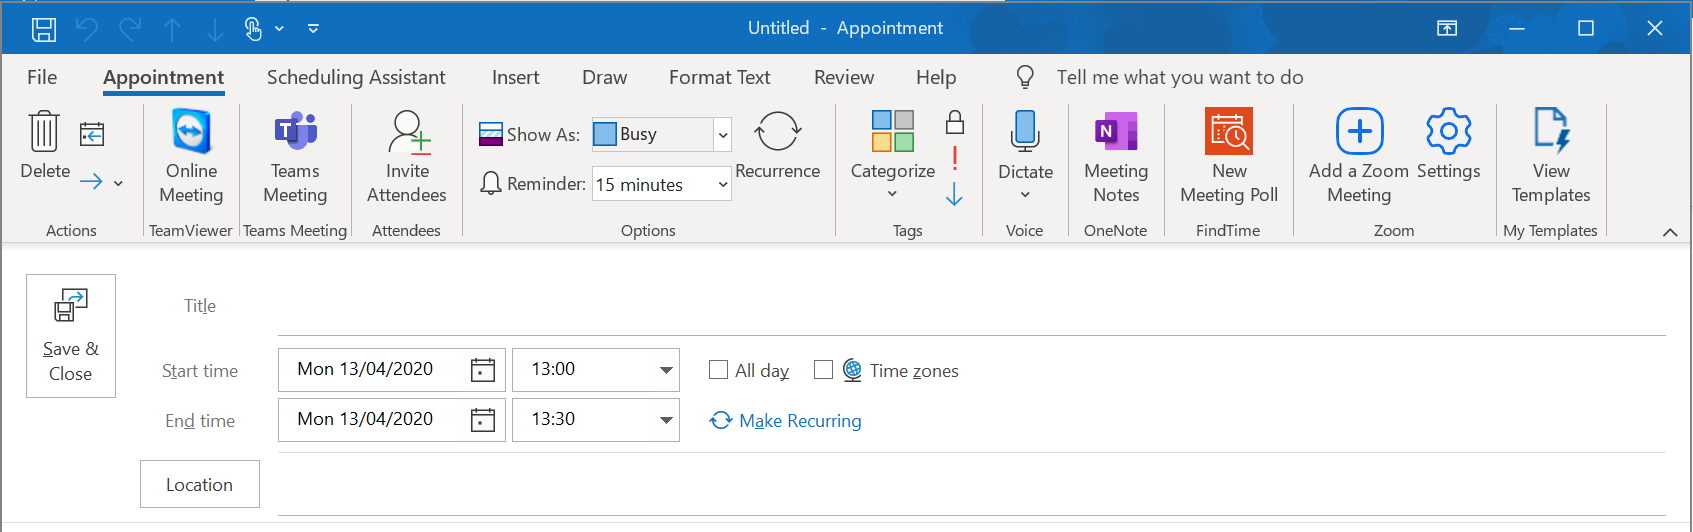 how to set up a zoom meeting on outlook